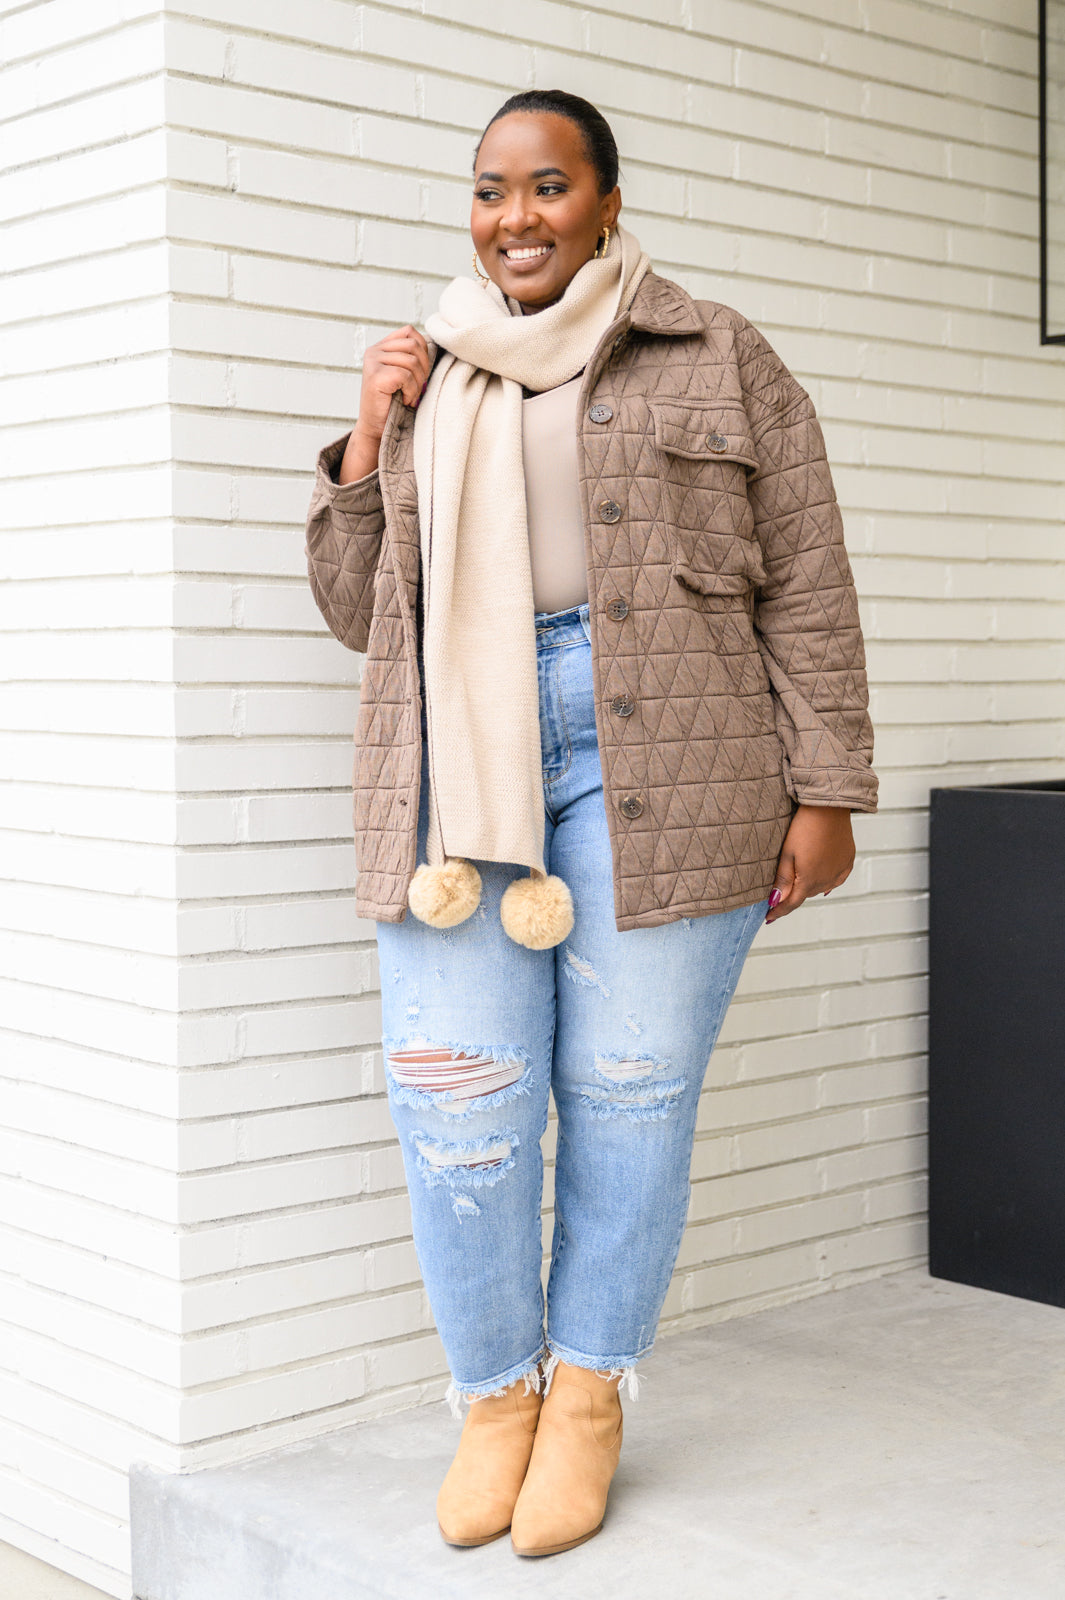 Coming Back Home Jacket in Mocha (Online Exclusive)